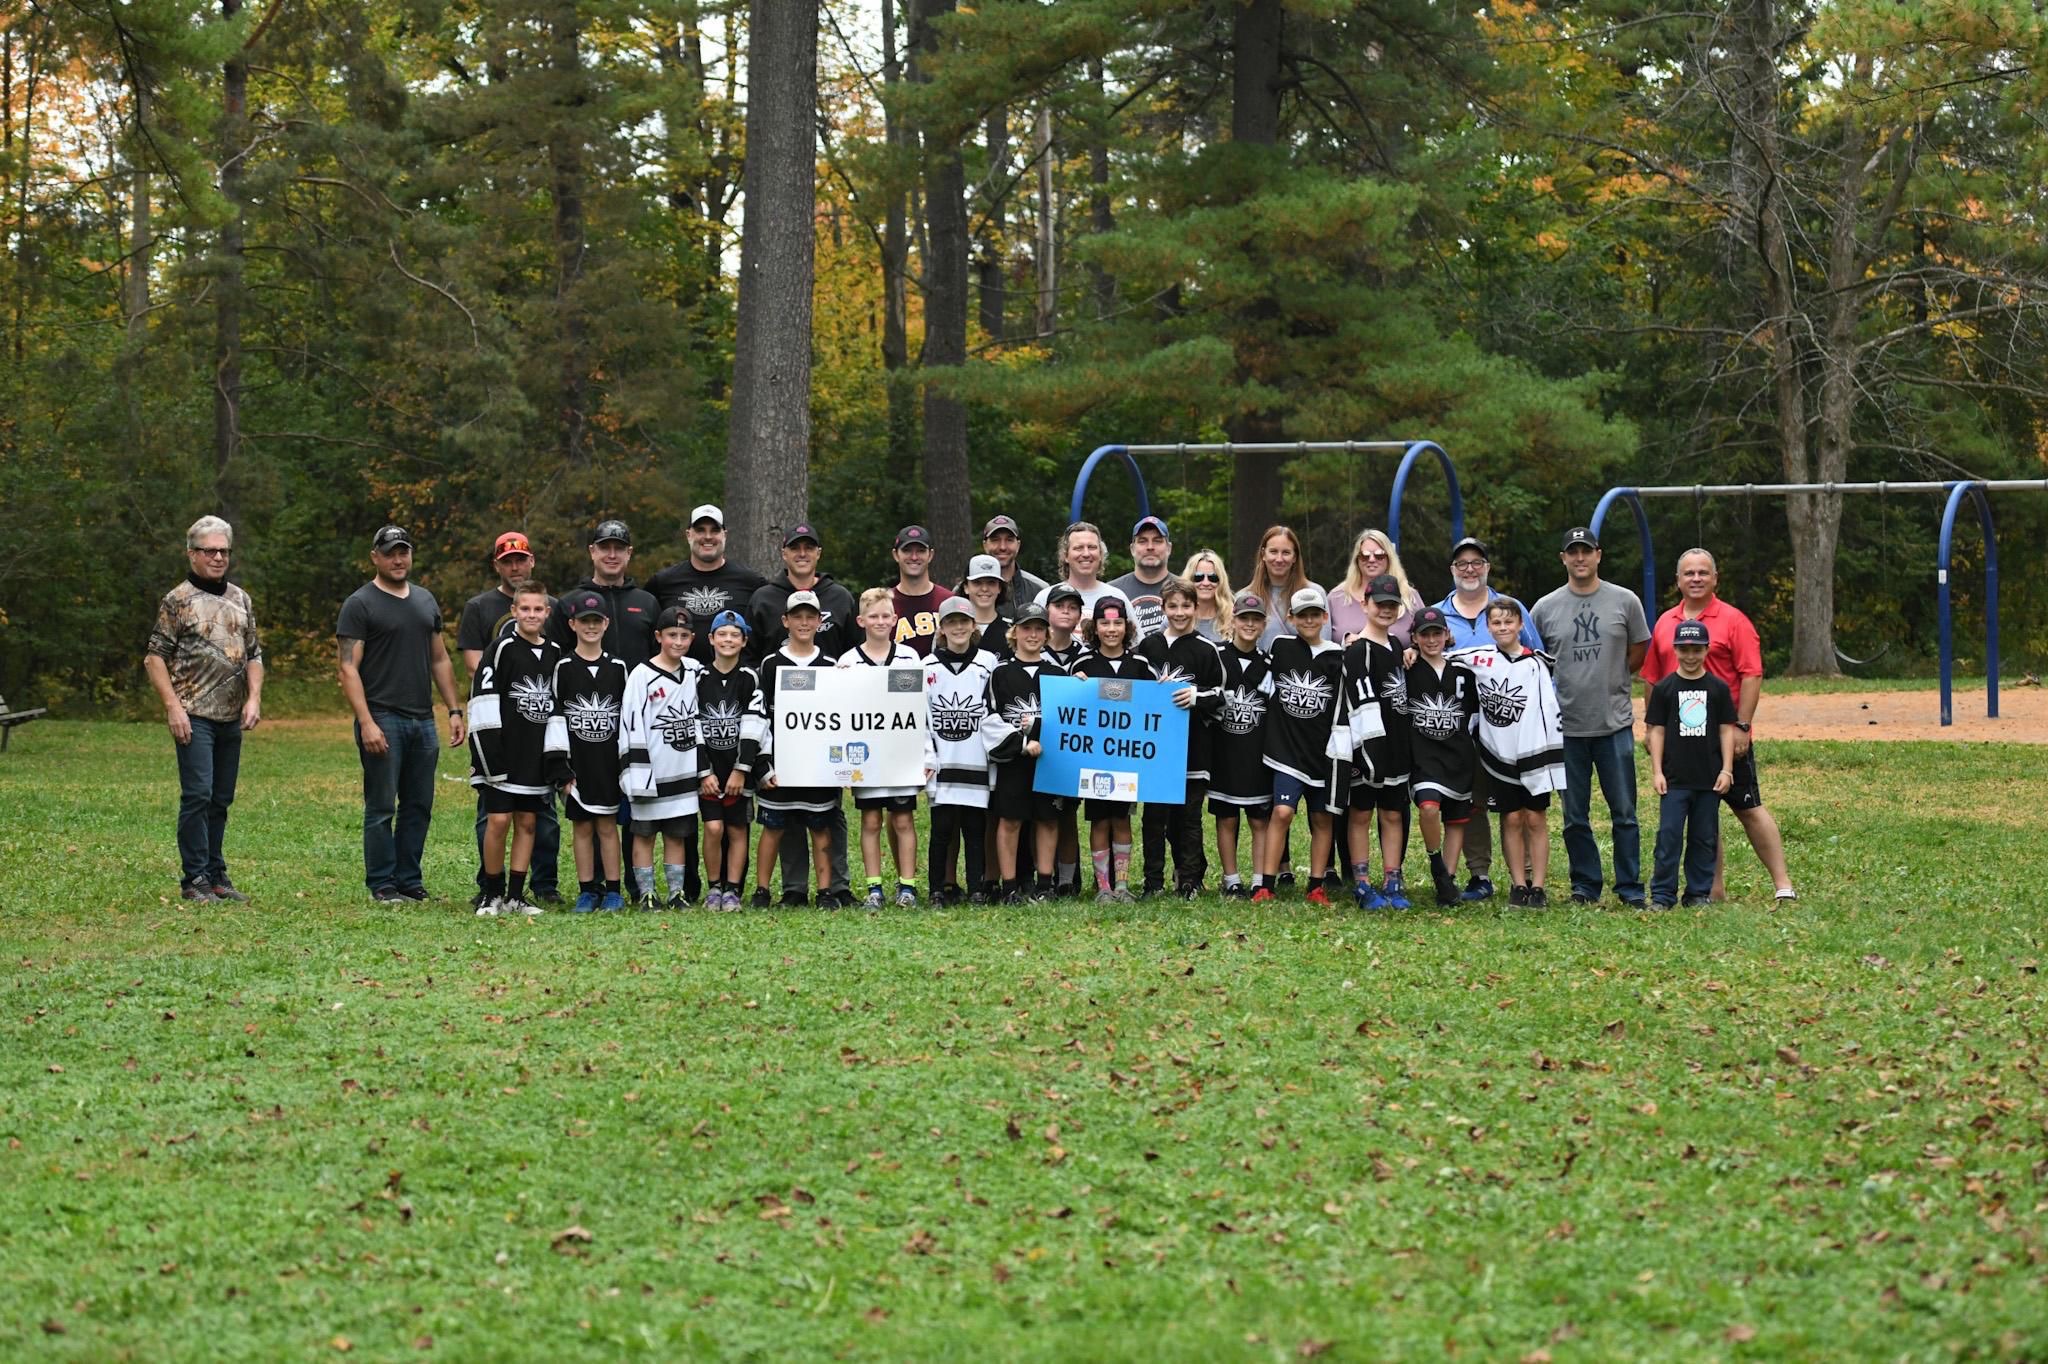 The Silver Sevens U12AA hockey team and coaches on a field, holding the signs 